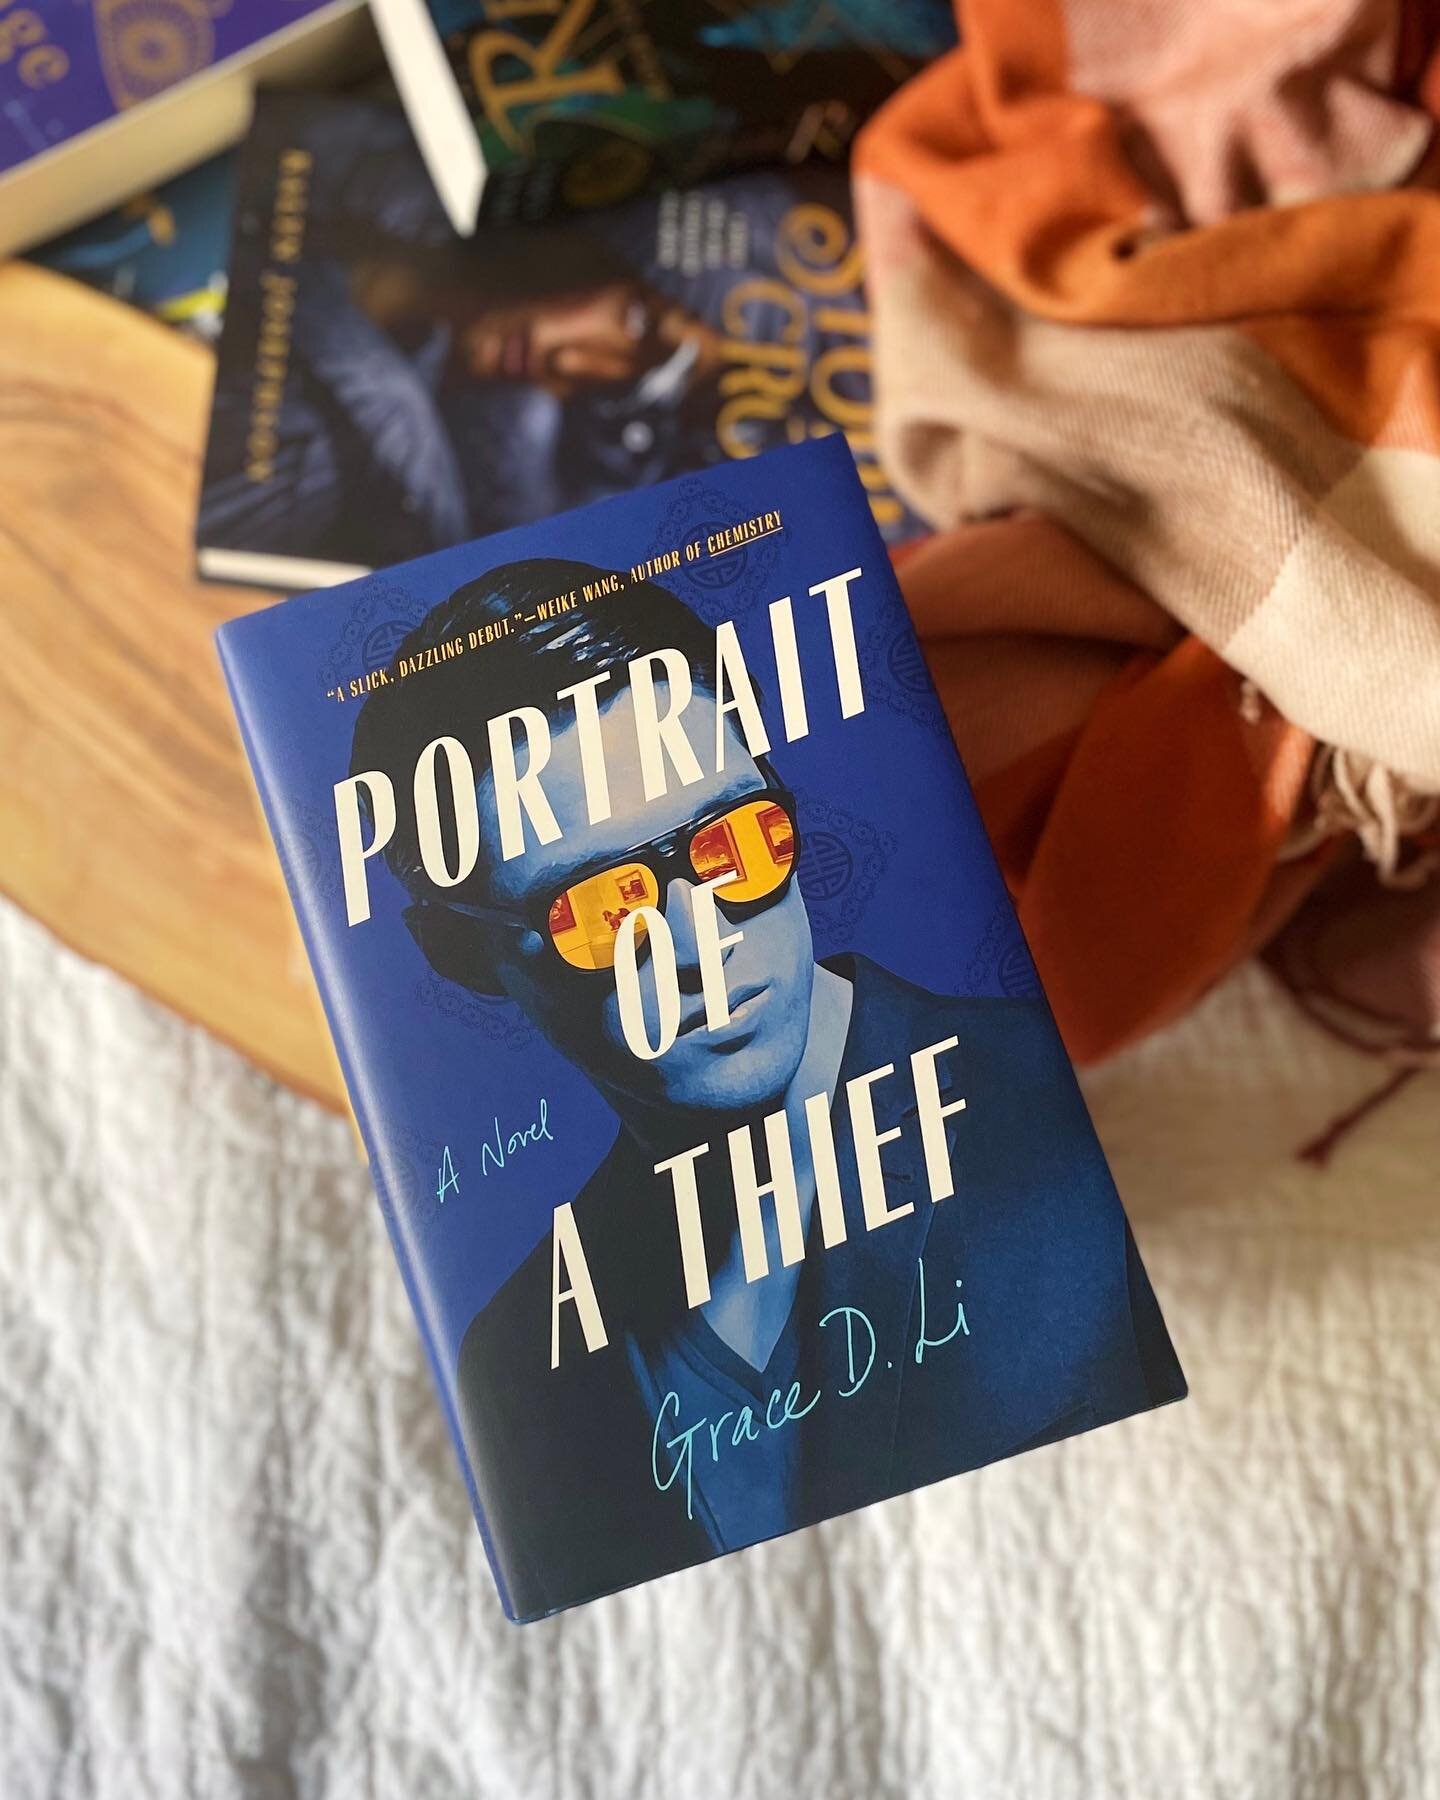 TBR Thursday:
As you might imagine, I&rsquo;ve rededicated May to my normal programming of Asian Authors All The Time rather than branching out.

Super excited to read Portrait of a Thief, Grace D. Li&rsquo;s debut. Who doesn&rsquo;t love a good art 